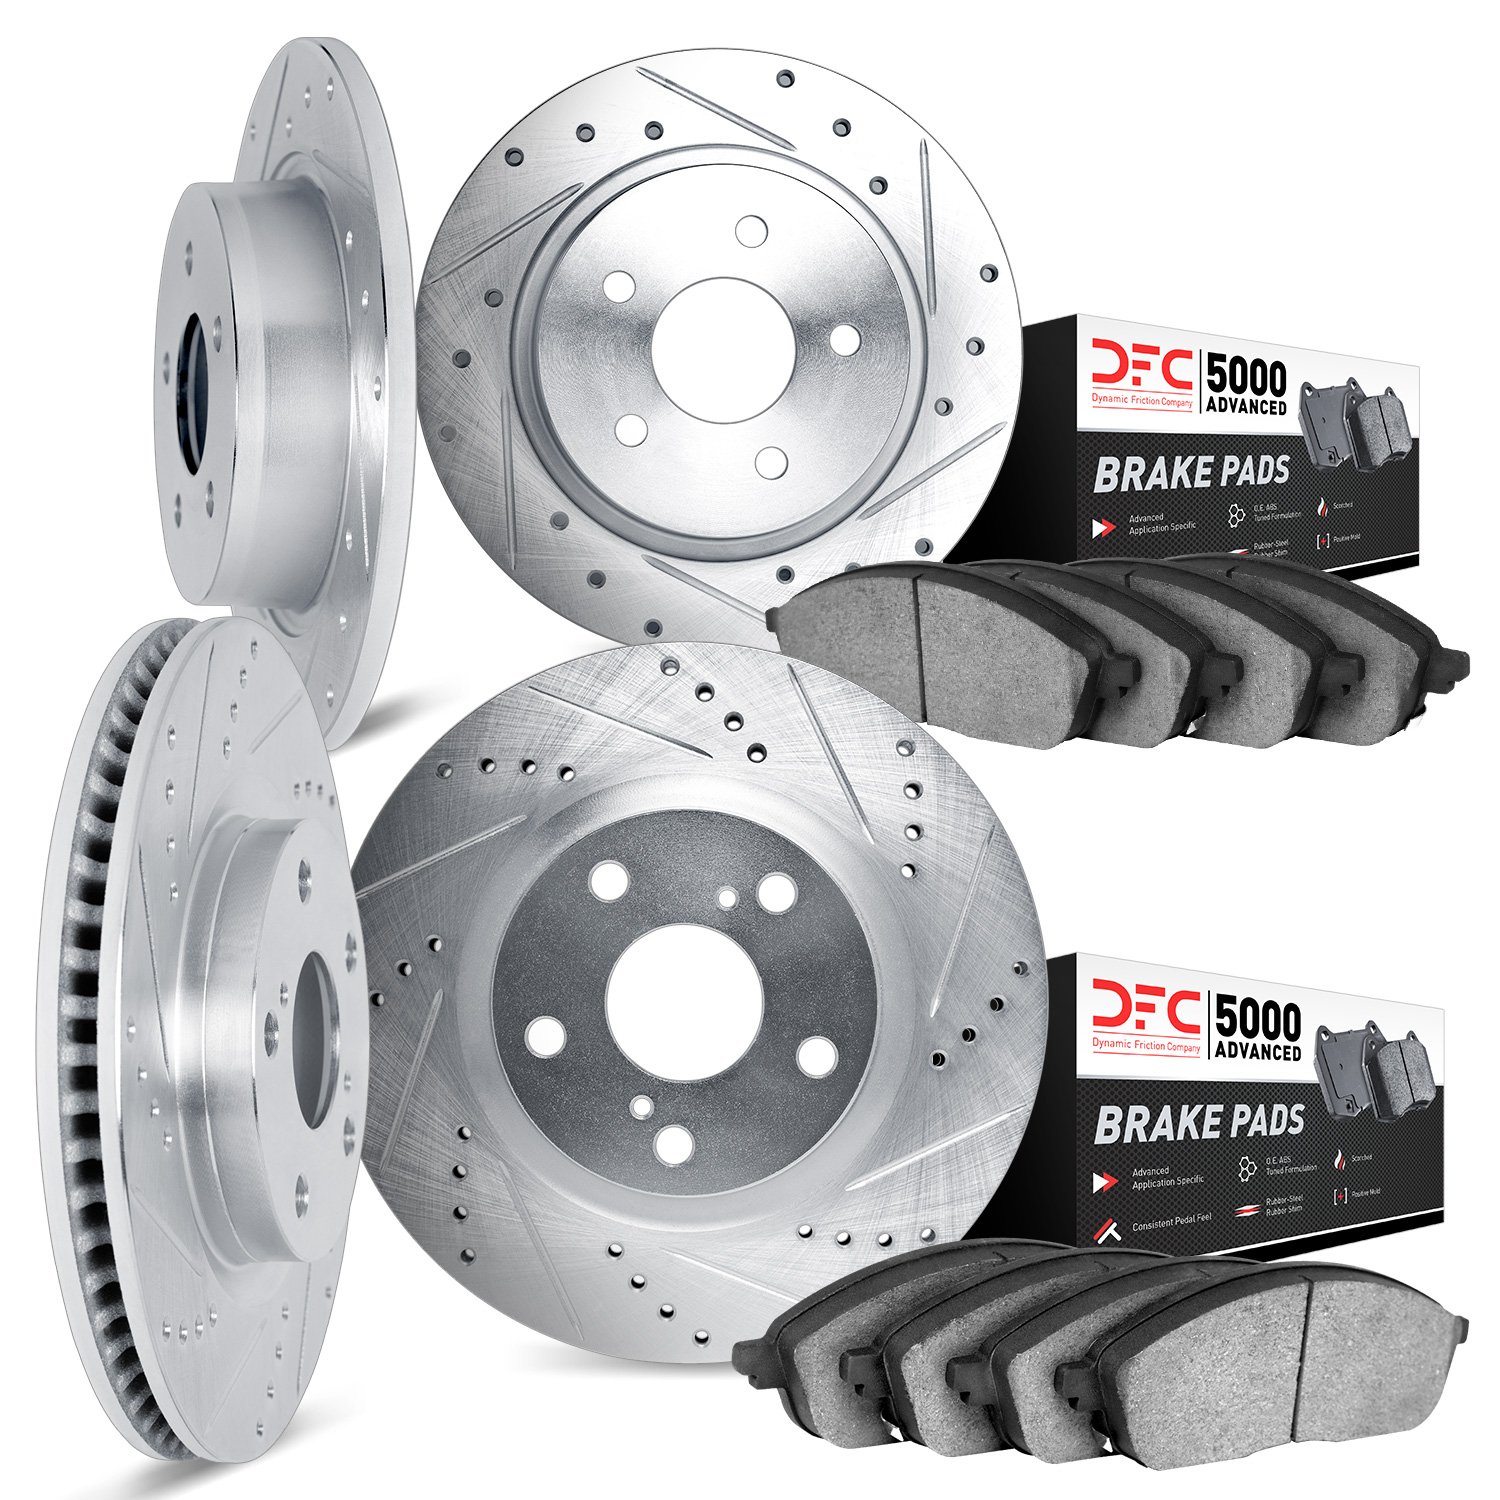 7504-75005 Drilled/Slotted Brake Rotors w/5000 Advanced Brake Pads Kit [Silver], 2014-2015 Lexus/Toyota/Scion, Position: Front a